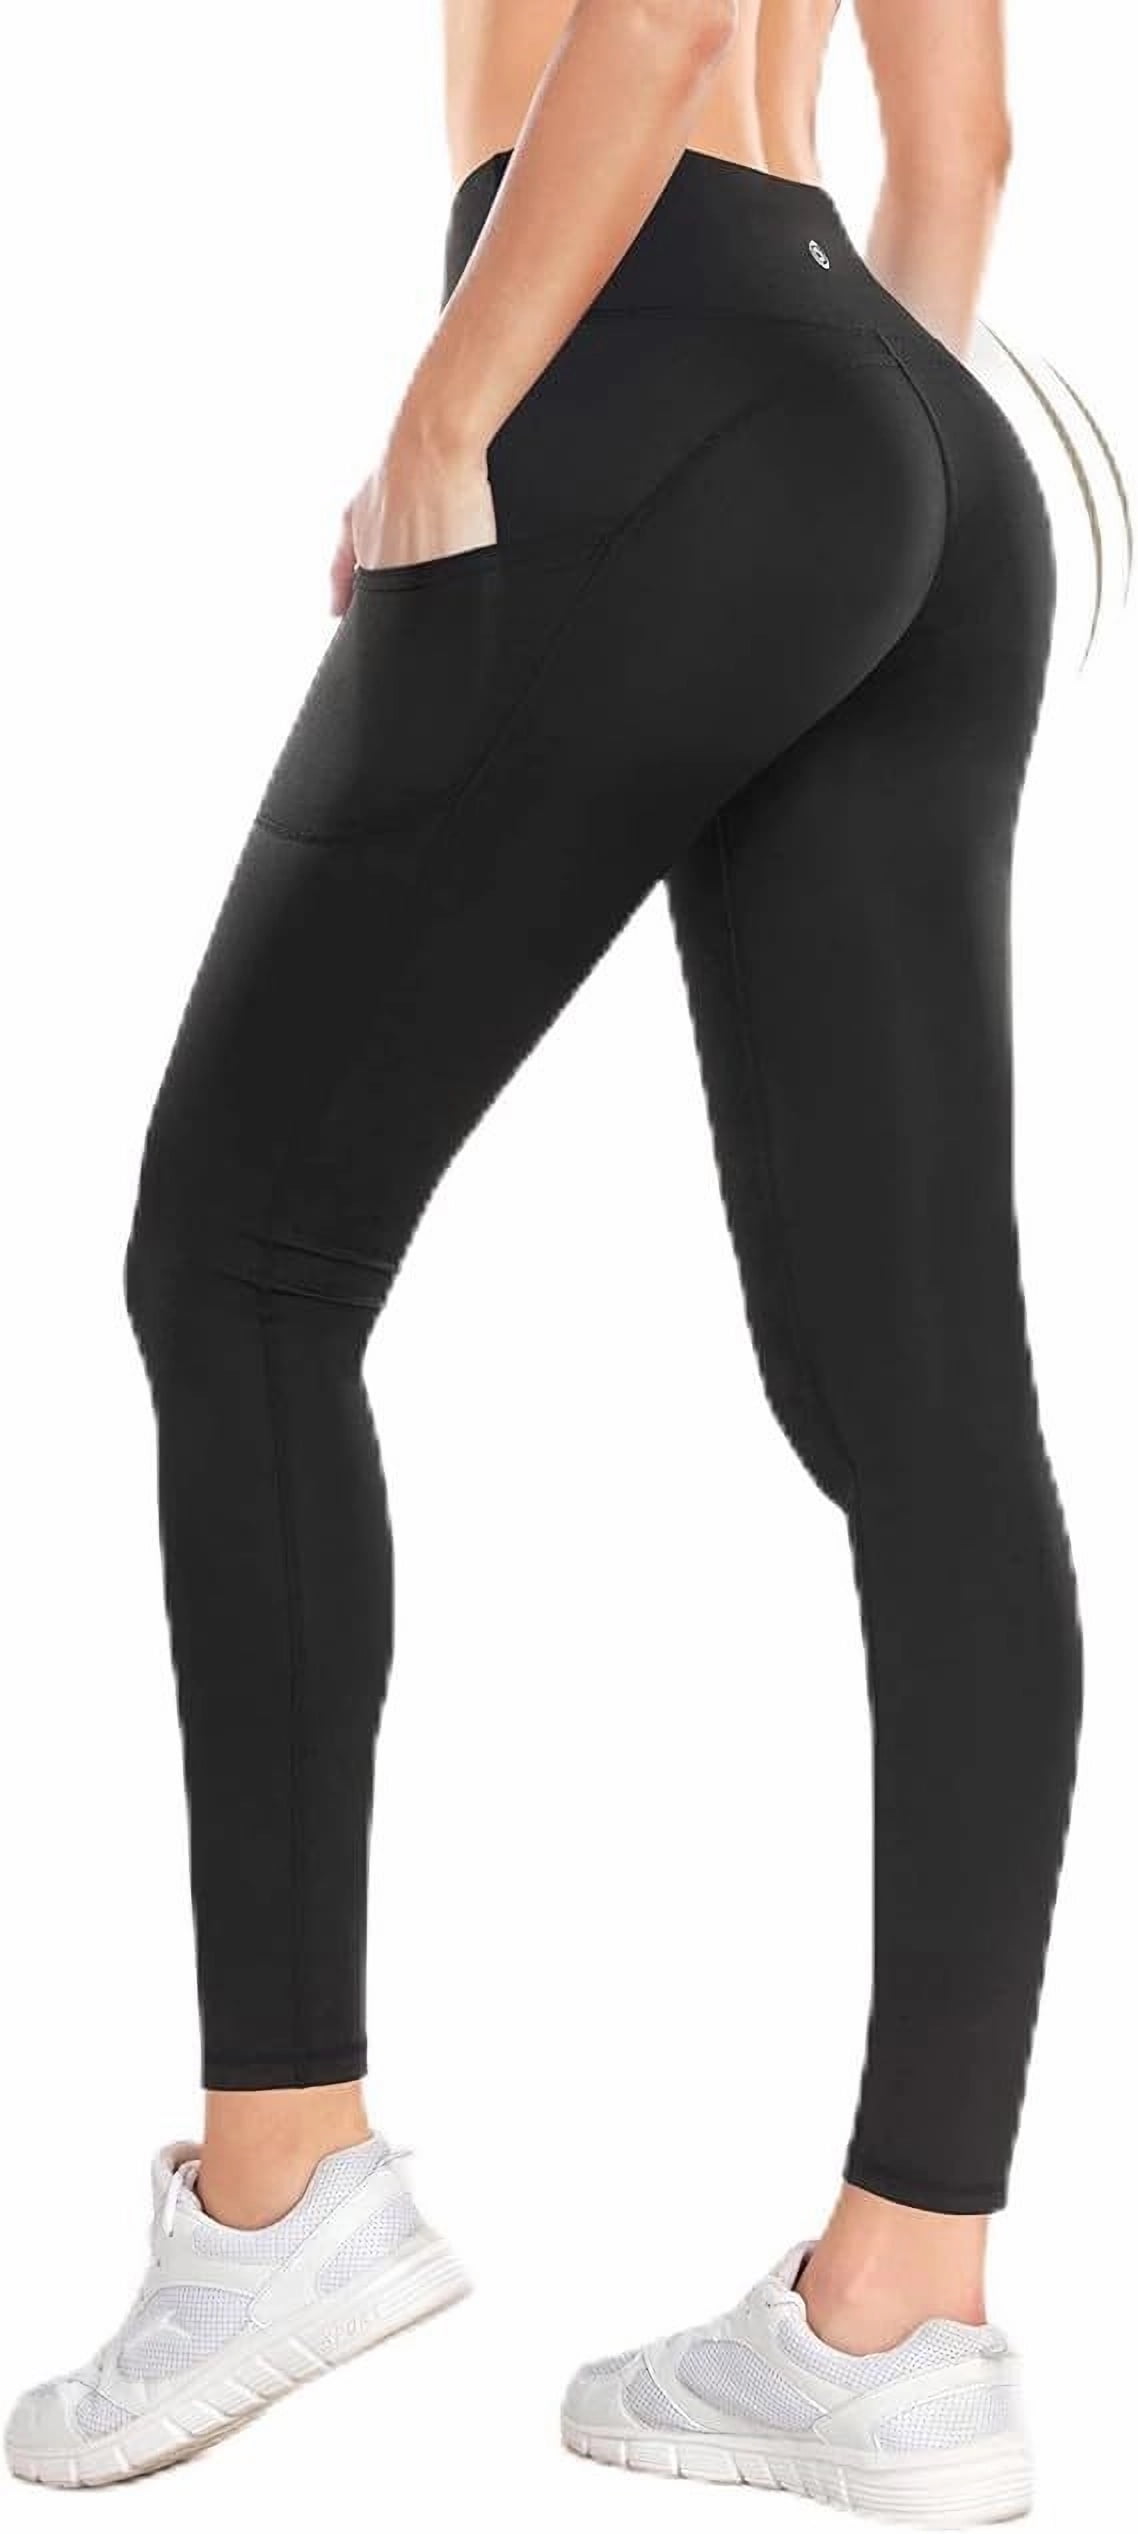 CAMBIVO Flare Yoga Pants for Women High Waist, Bootcut Workout